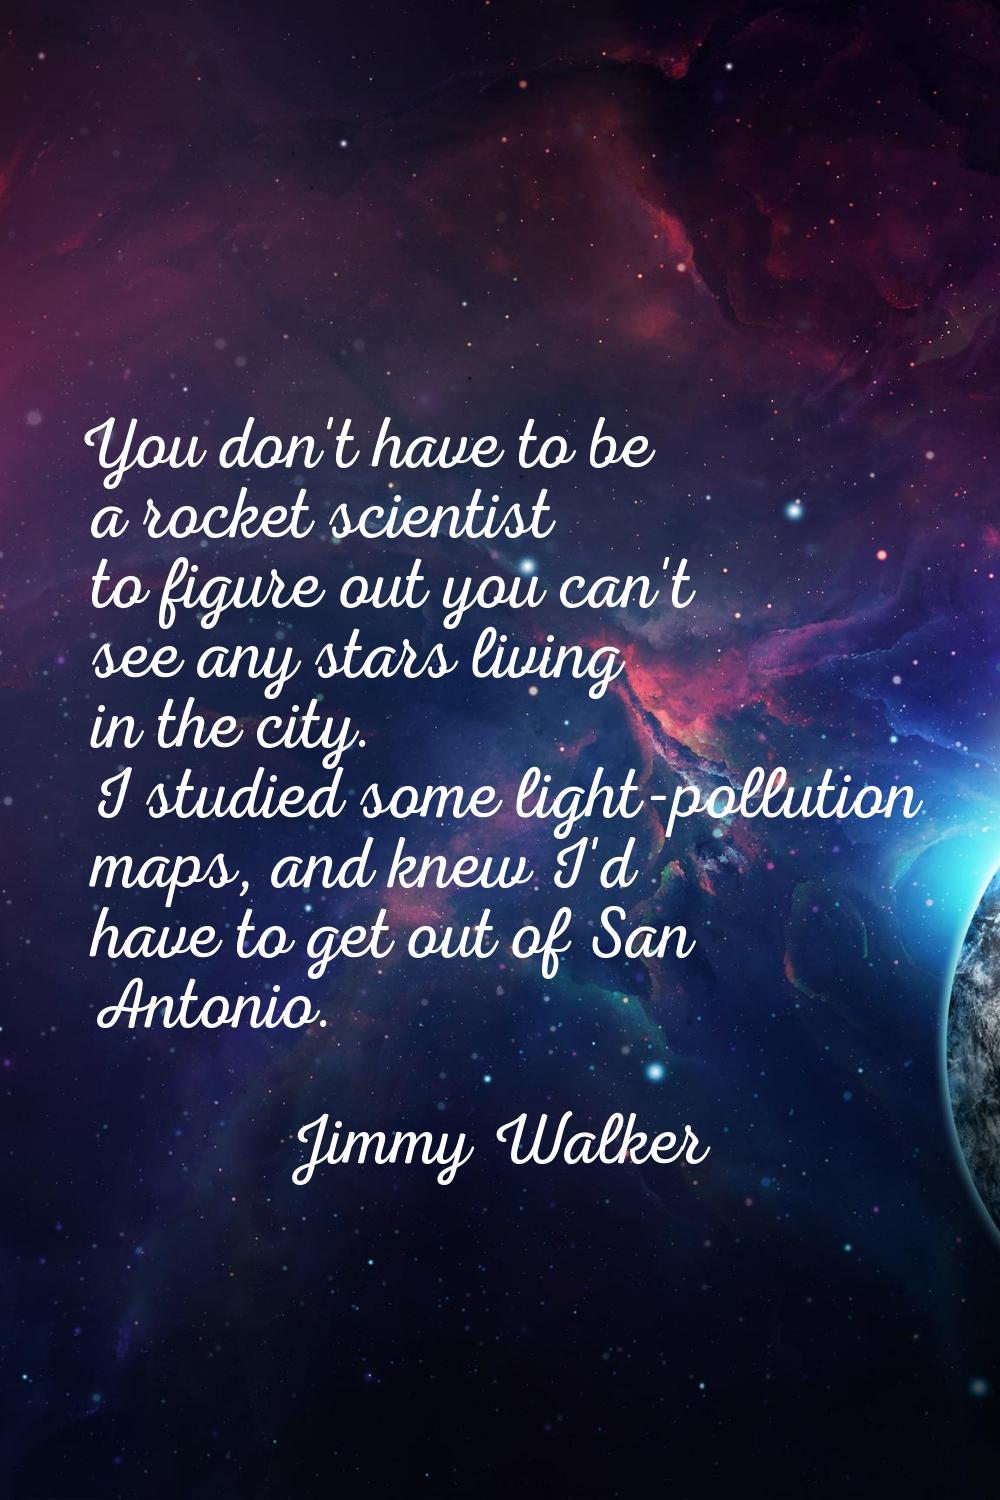 You don't have to be a rocket scientist to figure out you can't see any stars living in the city. I